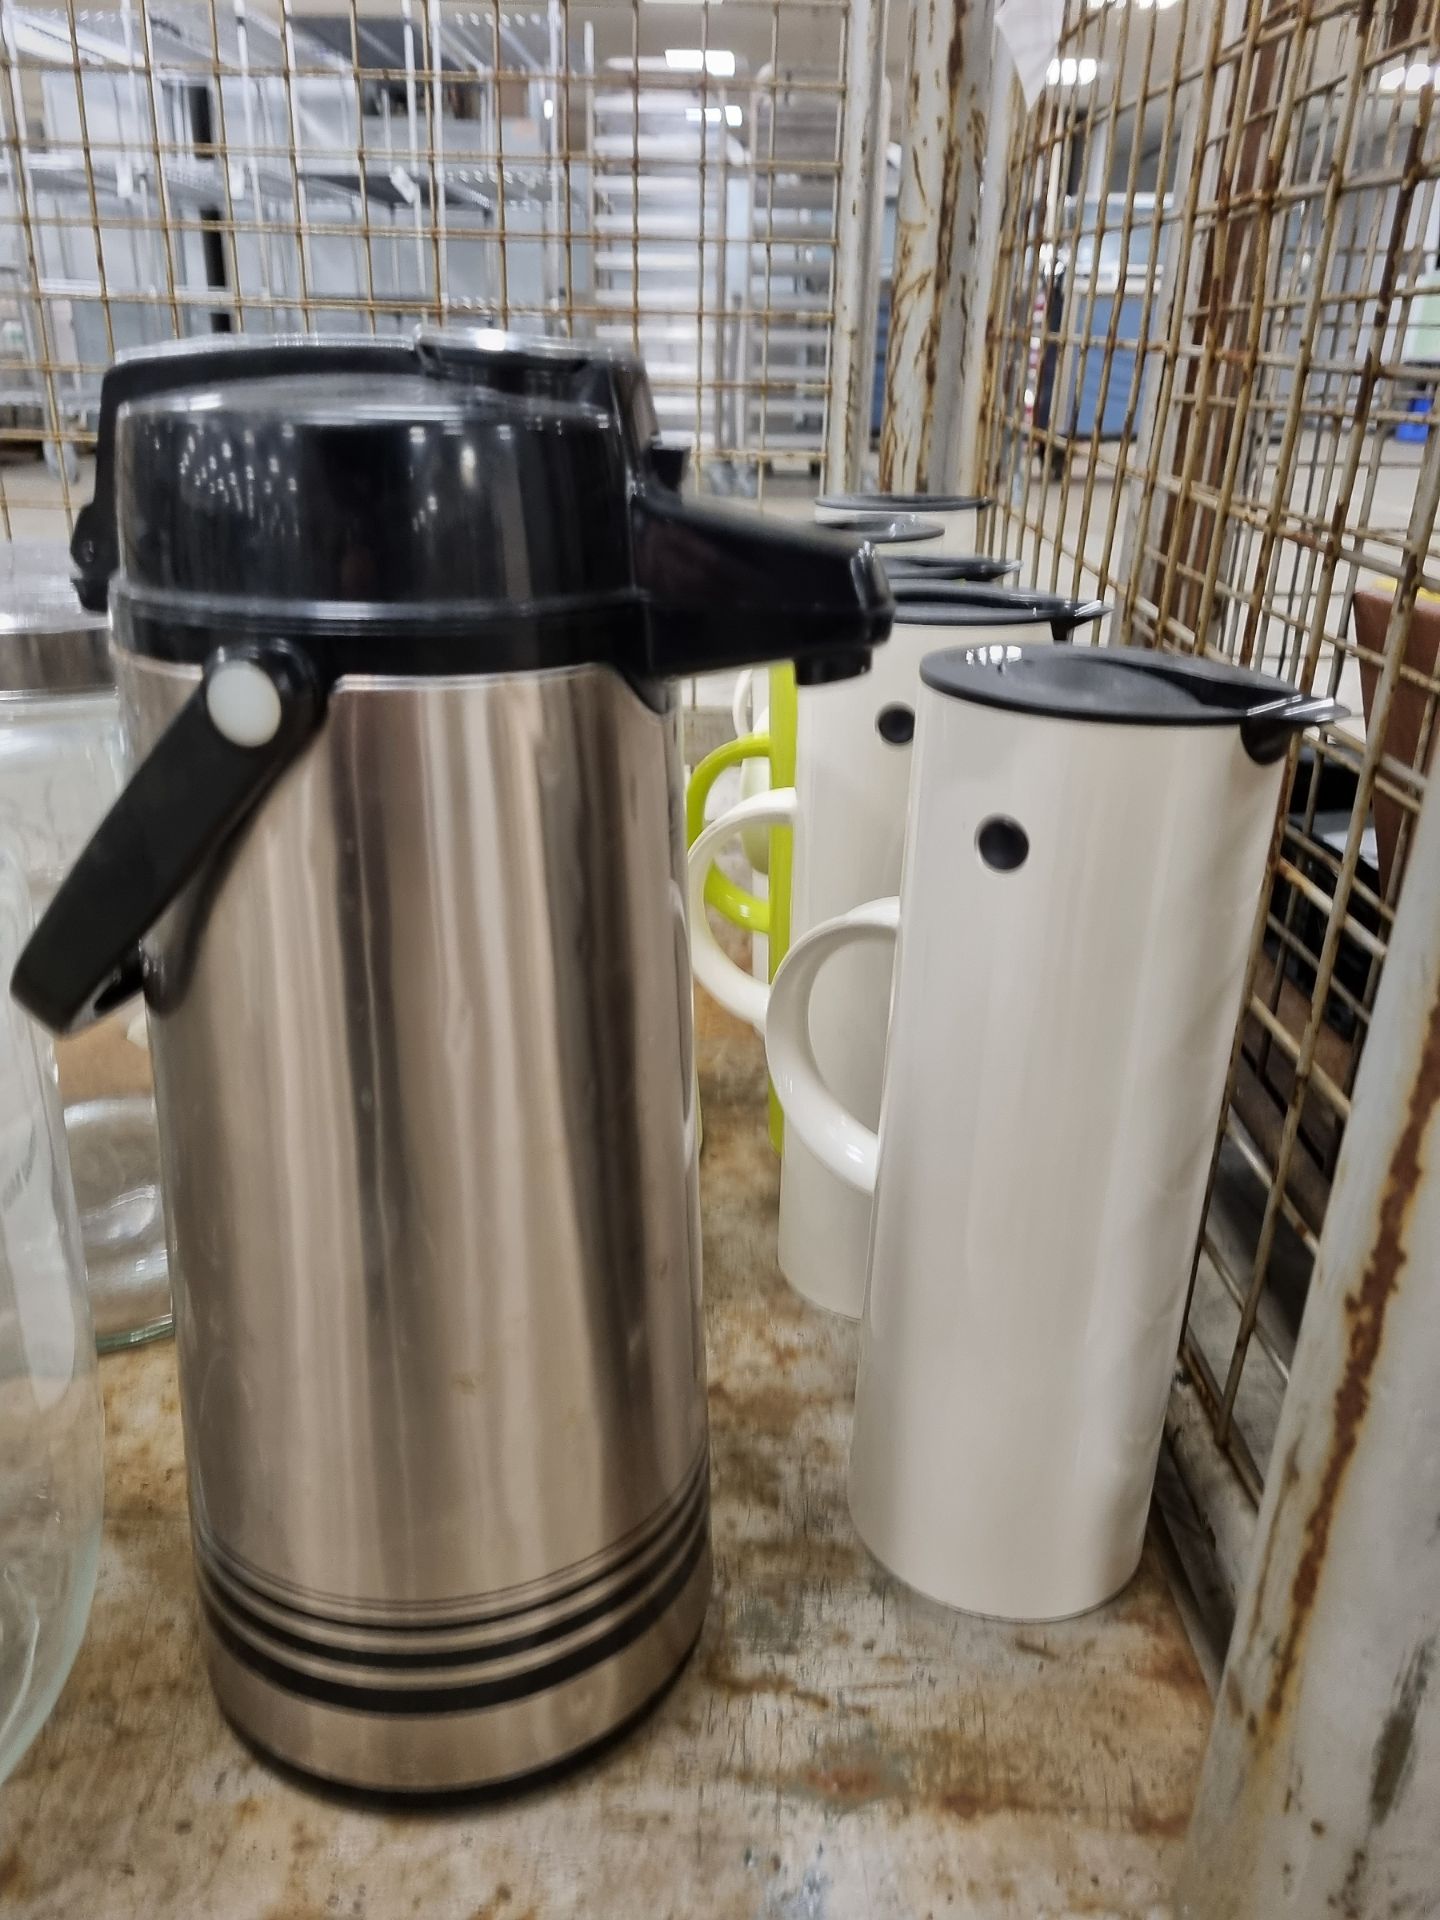 Catering equipment and supplies consisting of thermos type jugs, glassware, storage containers, jugs - Image 6 of 9